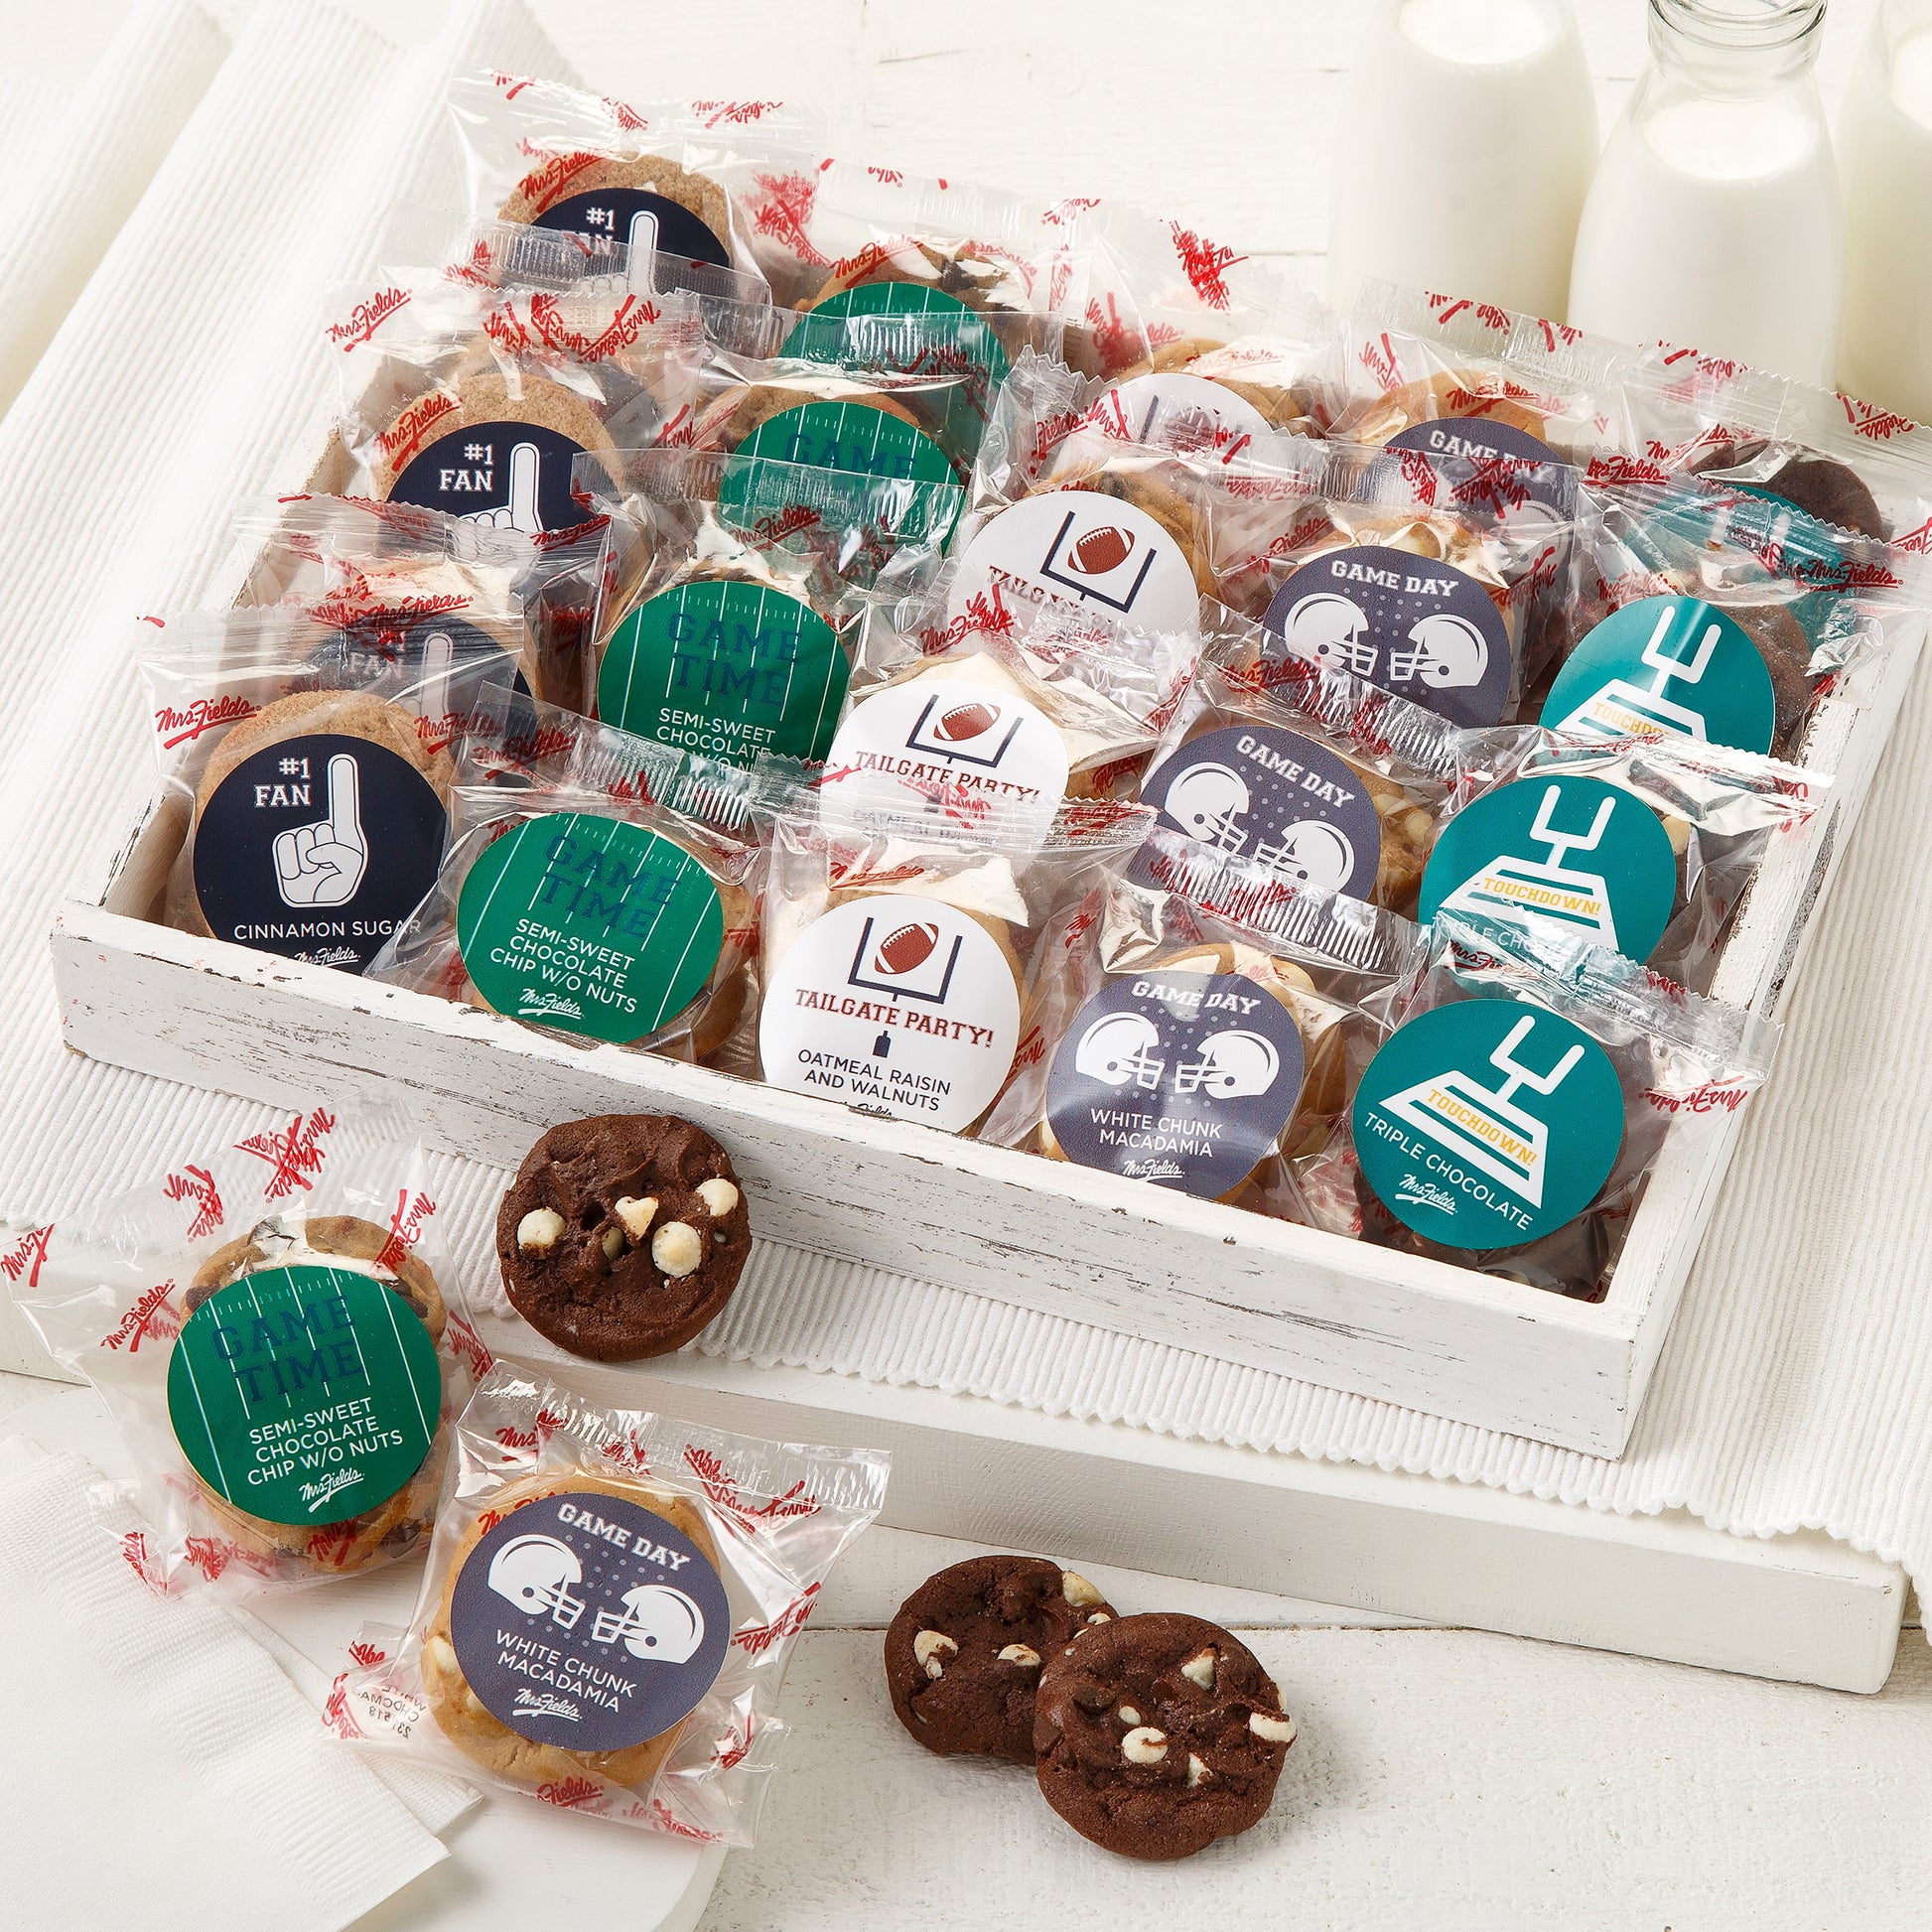 An assortment of packaged nibblers with football themed stickers on the packages